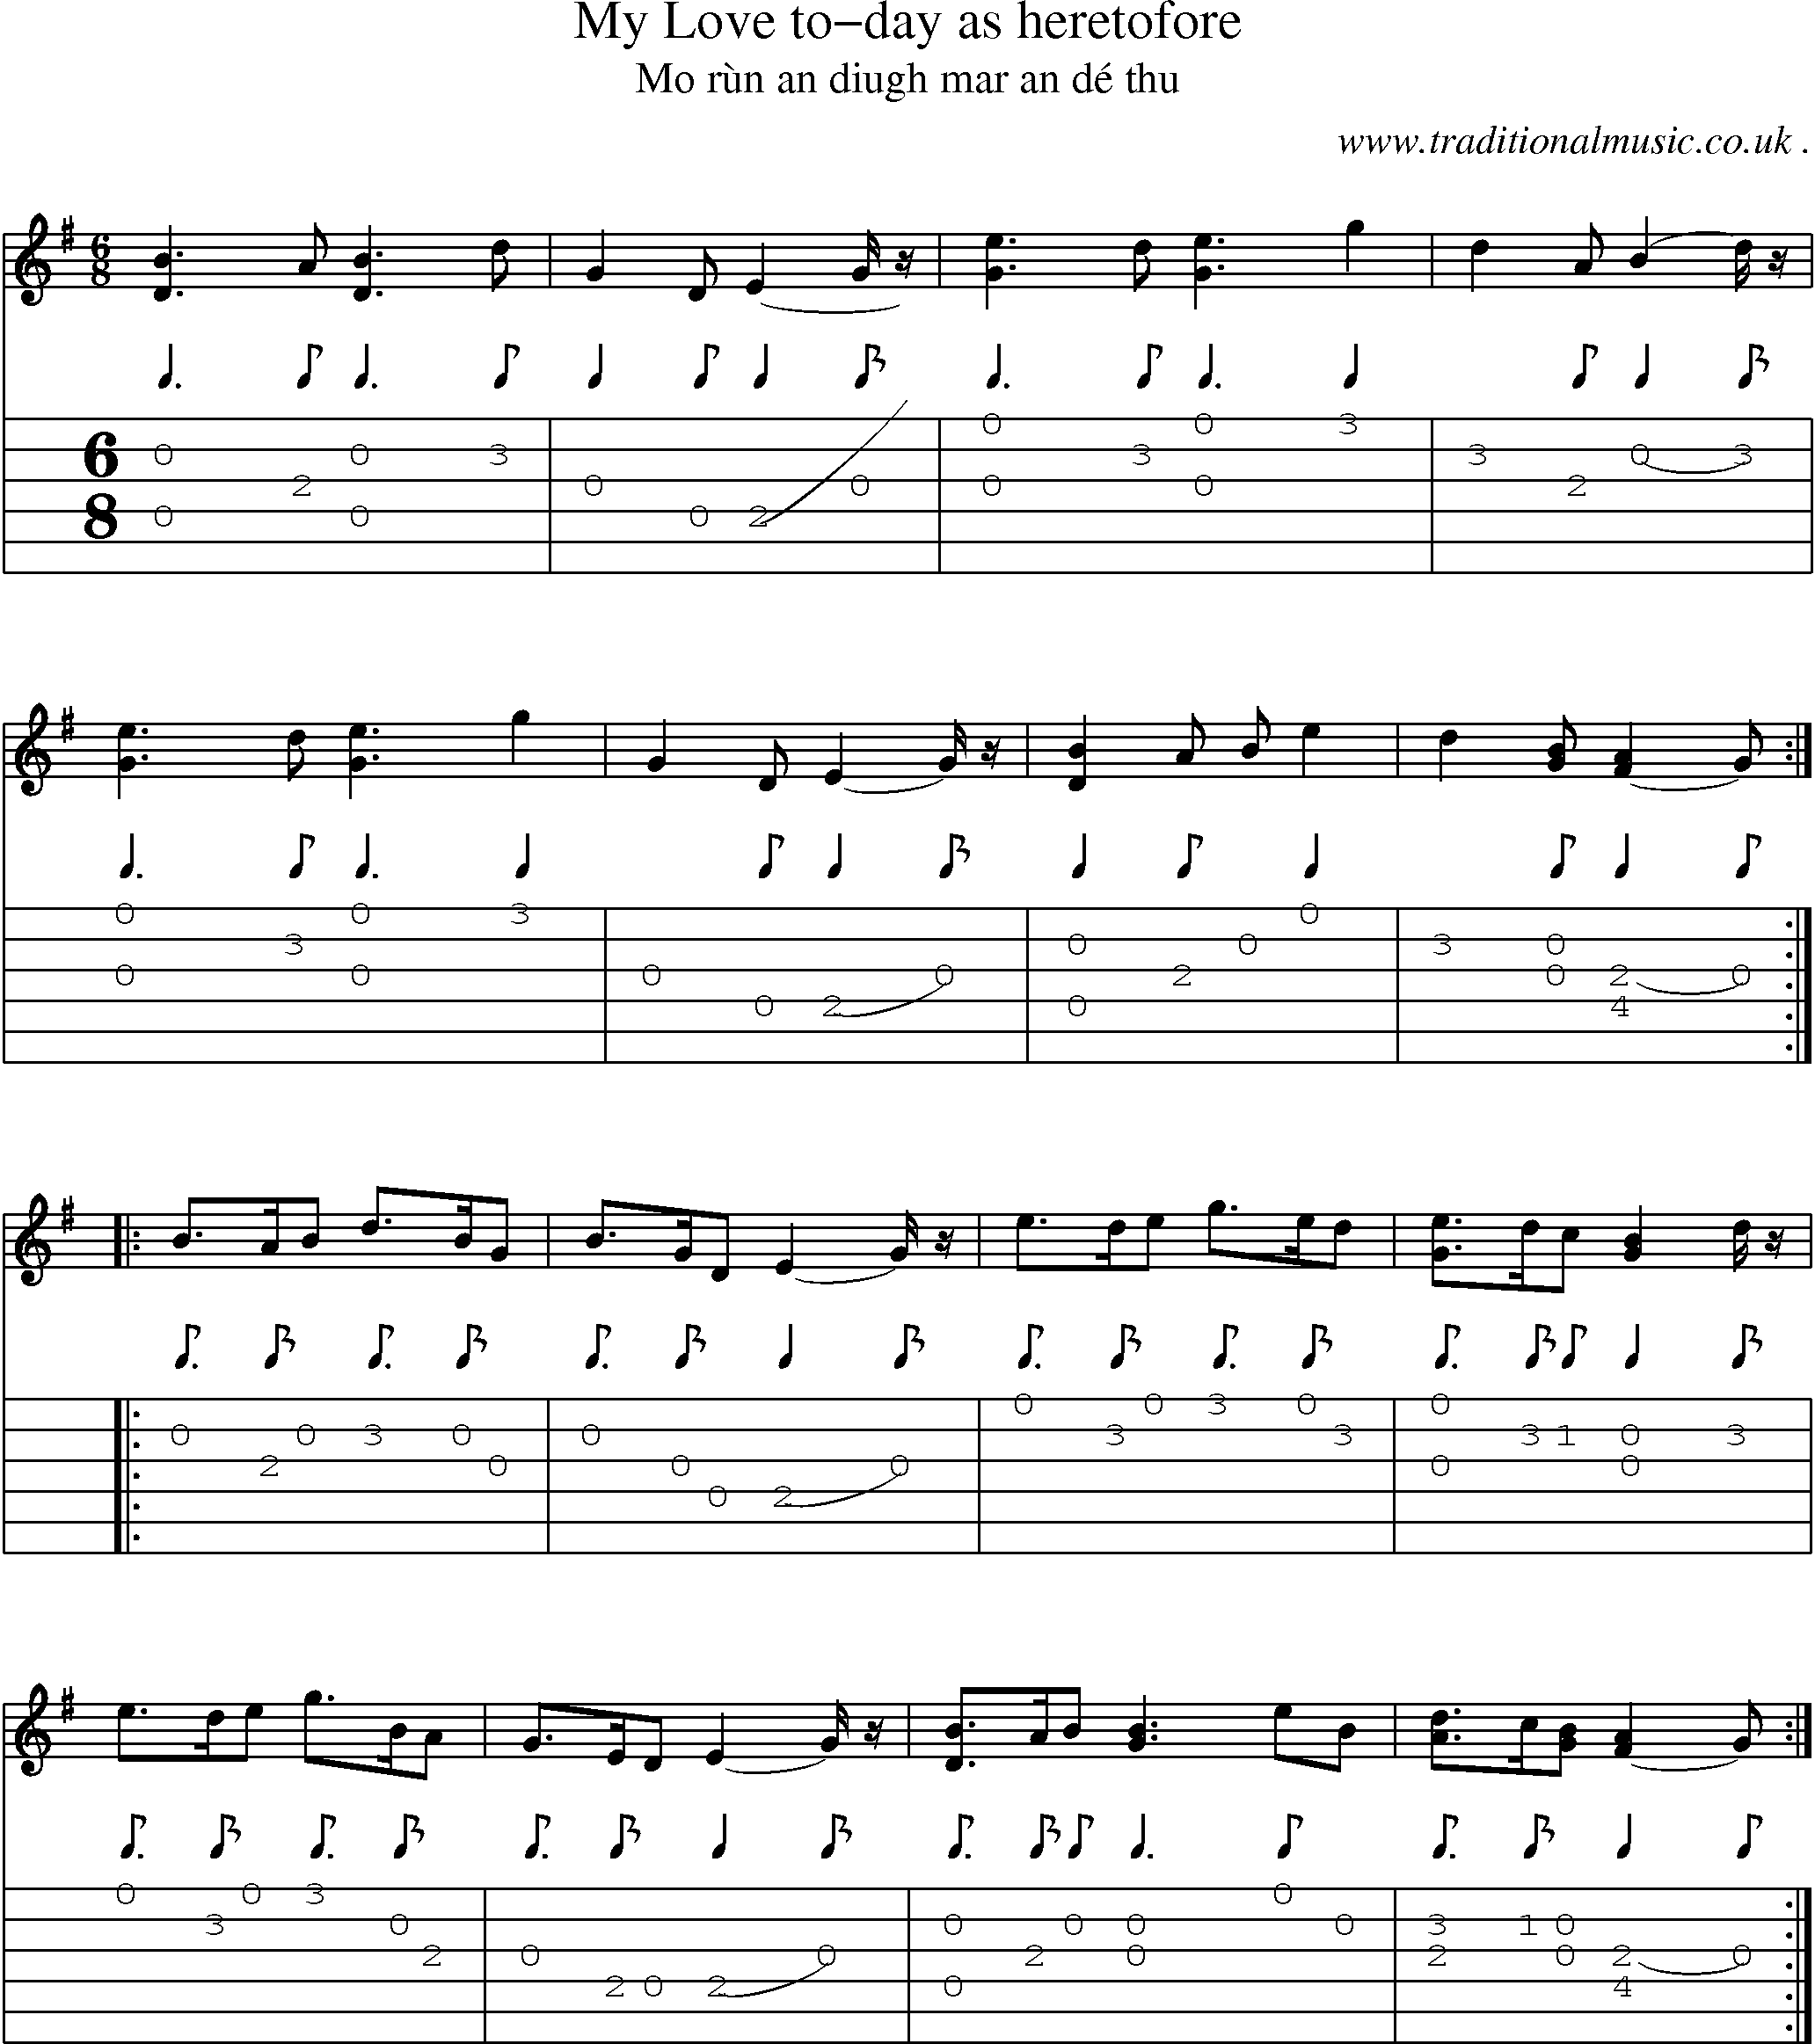 Sheet-music  score, Chords and Guitar Tabs for My Love To-day As Heretofore